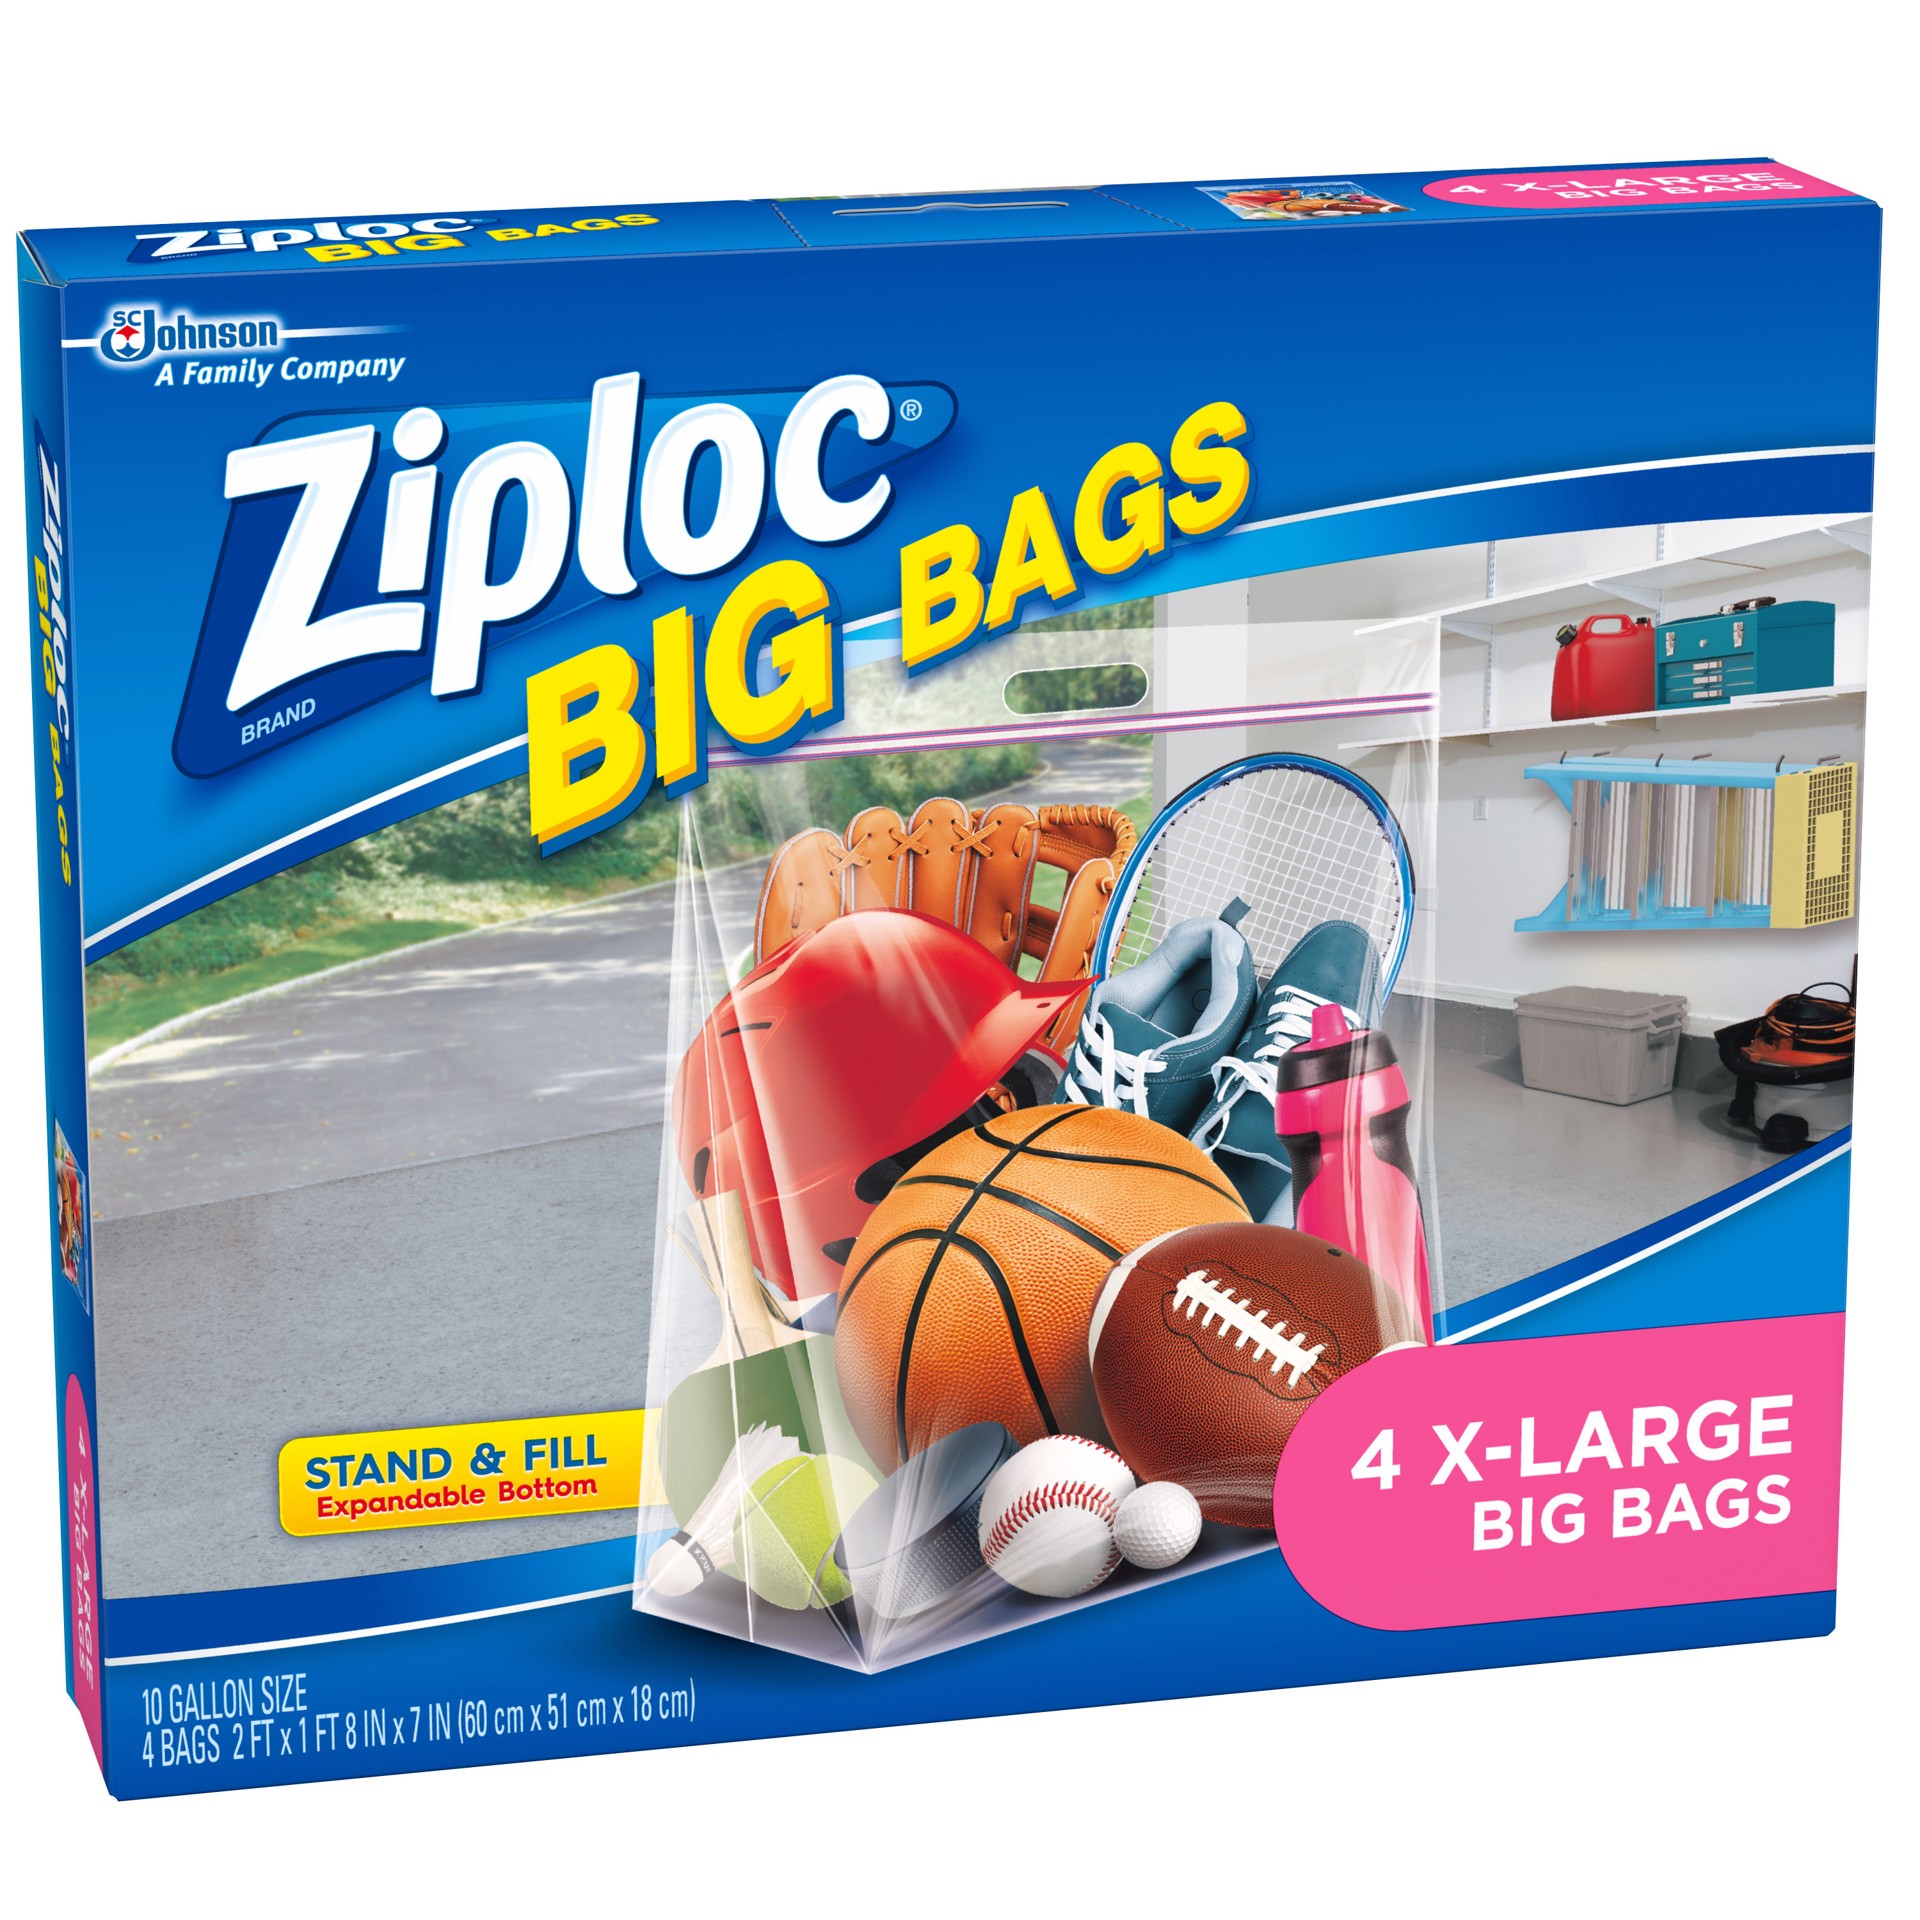 slide 3 of 5, Ziploc Big Bags, X-Large, Secure Double Zipper, 4 CT, Expandable Bottom, Heavy-Duty Plastic, Built-In Handles, Flexible Shape to Fit Where Storage Boxes Can't, 4 ct